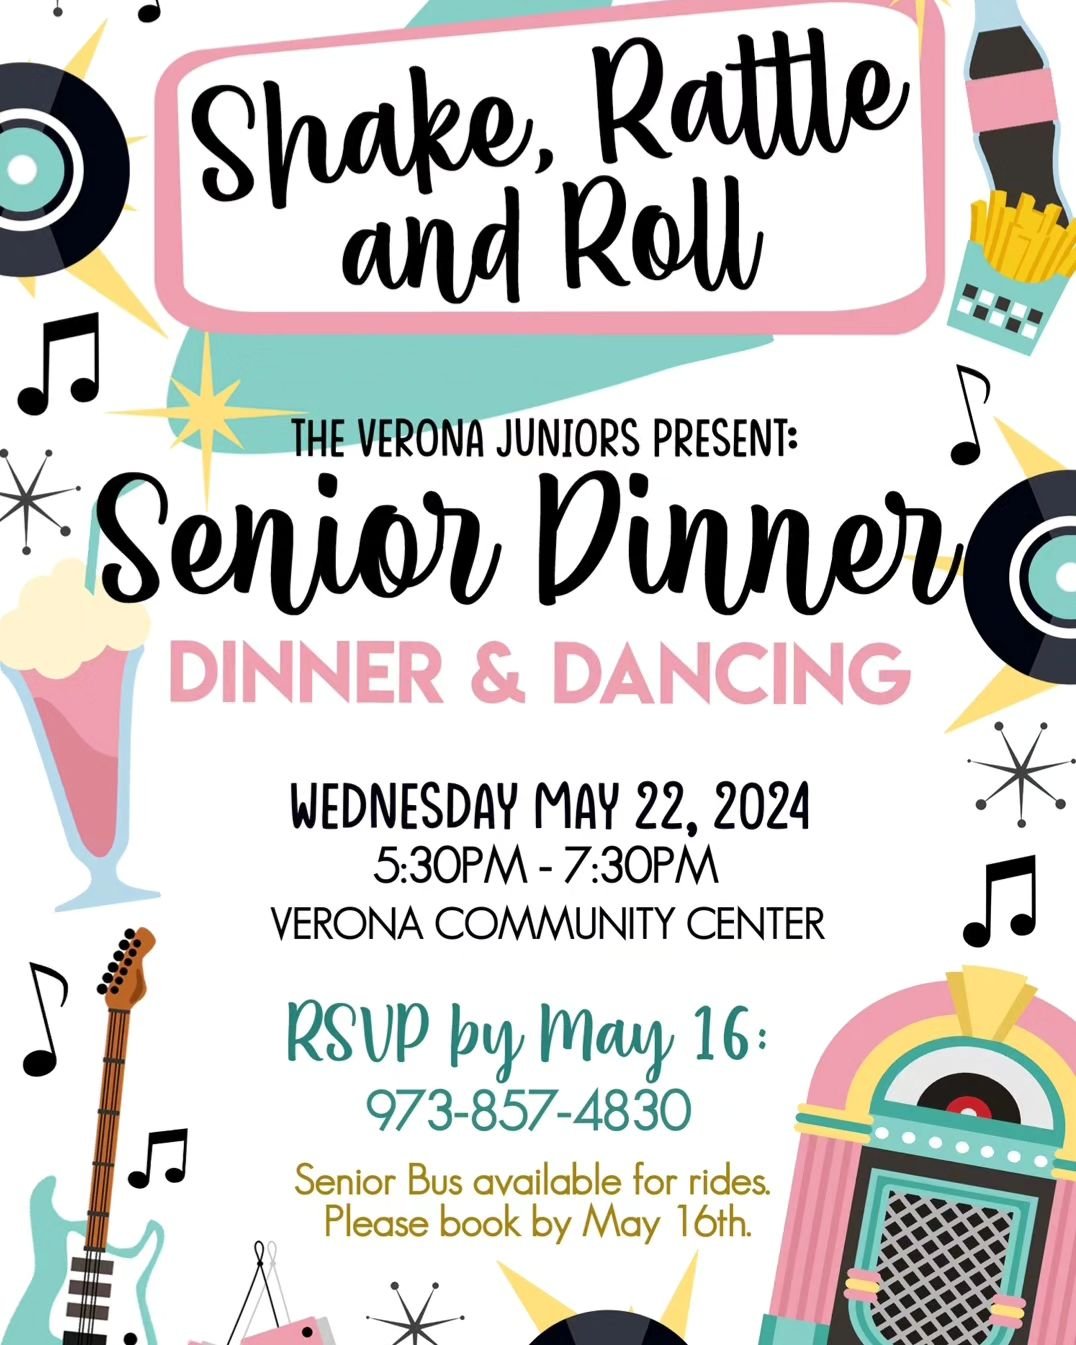 Our annual Senior Dinner is coming up this month! RSVP for this fun themed night with food and dancing by May 16. See you there!

#veronanj @township_of_verona